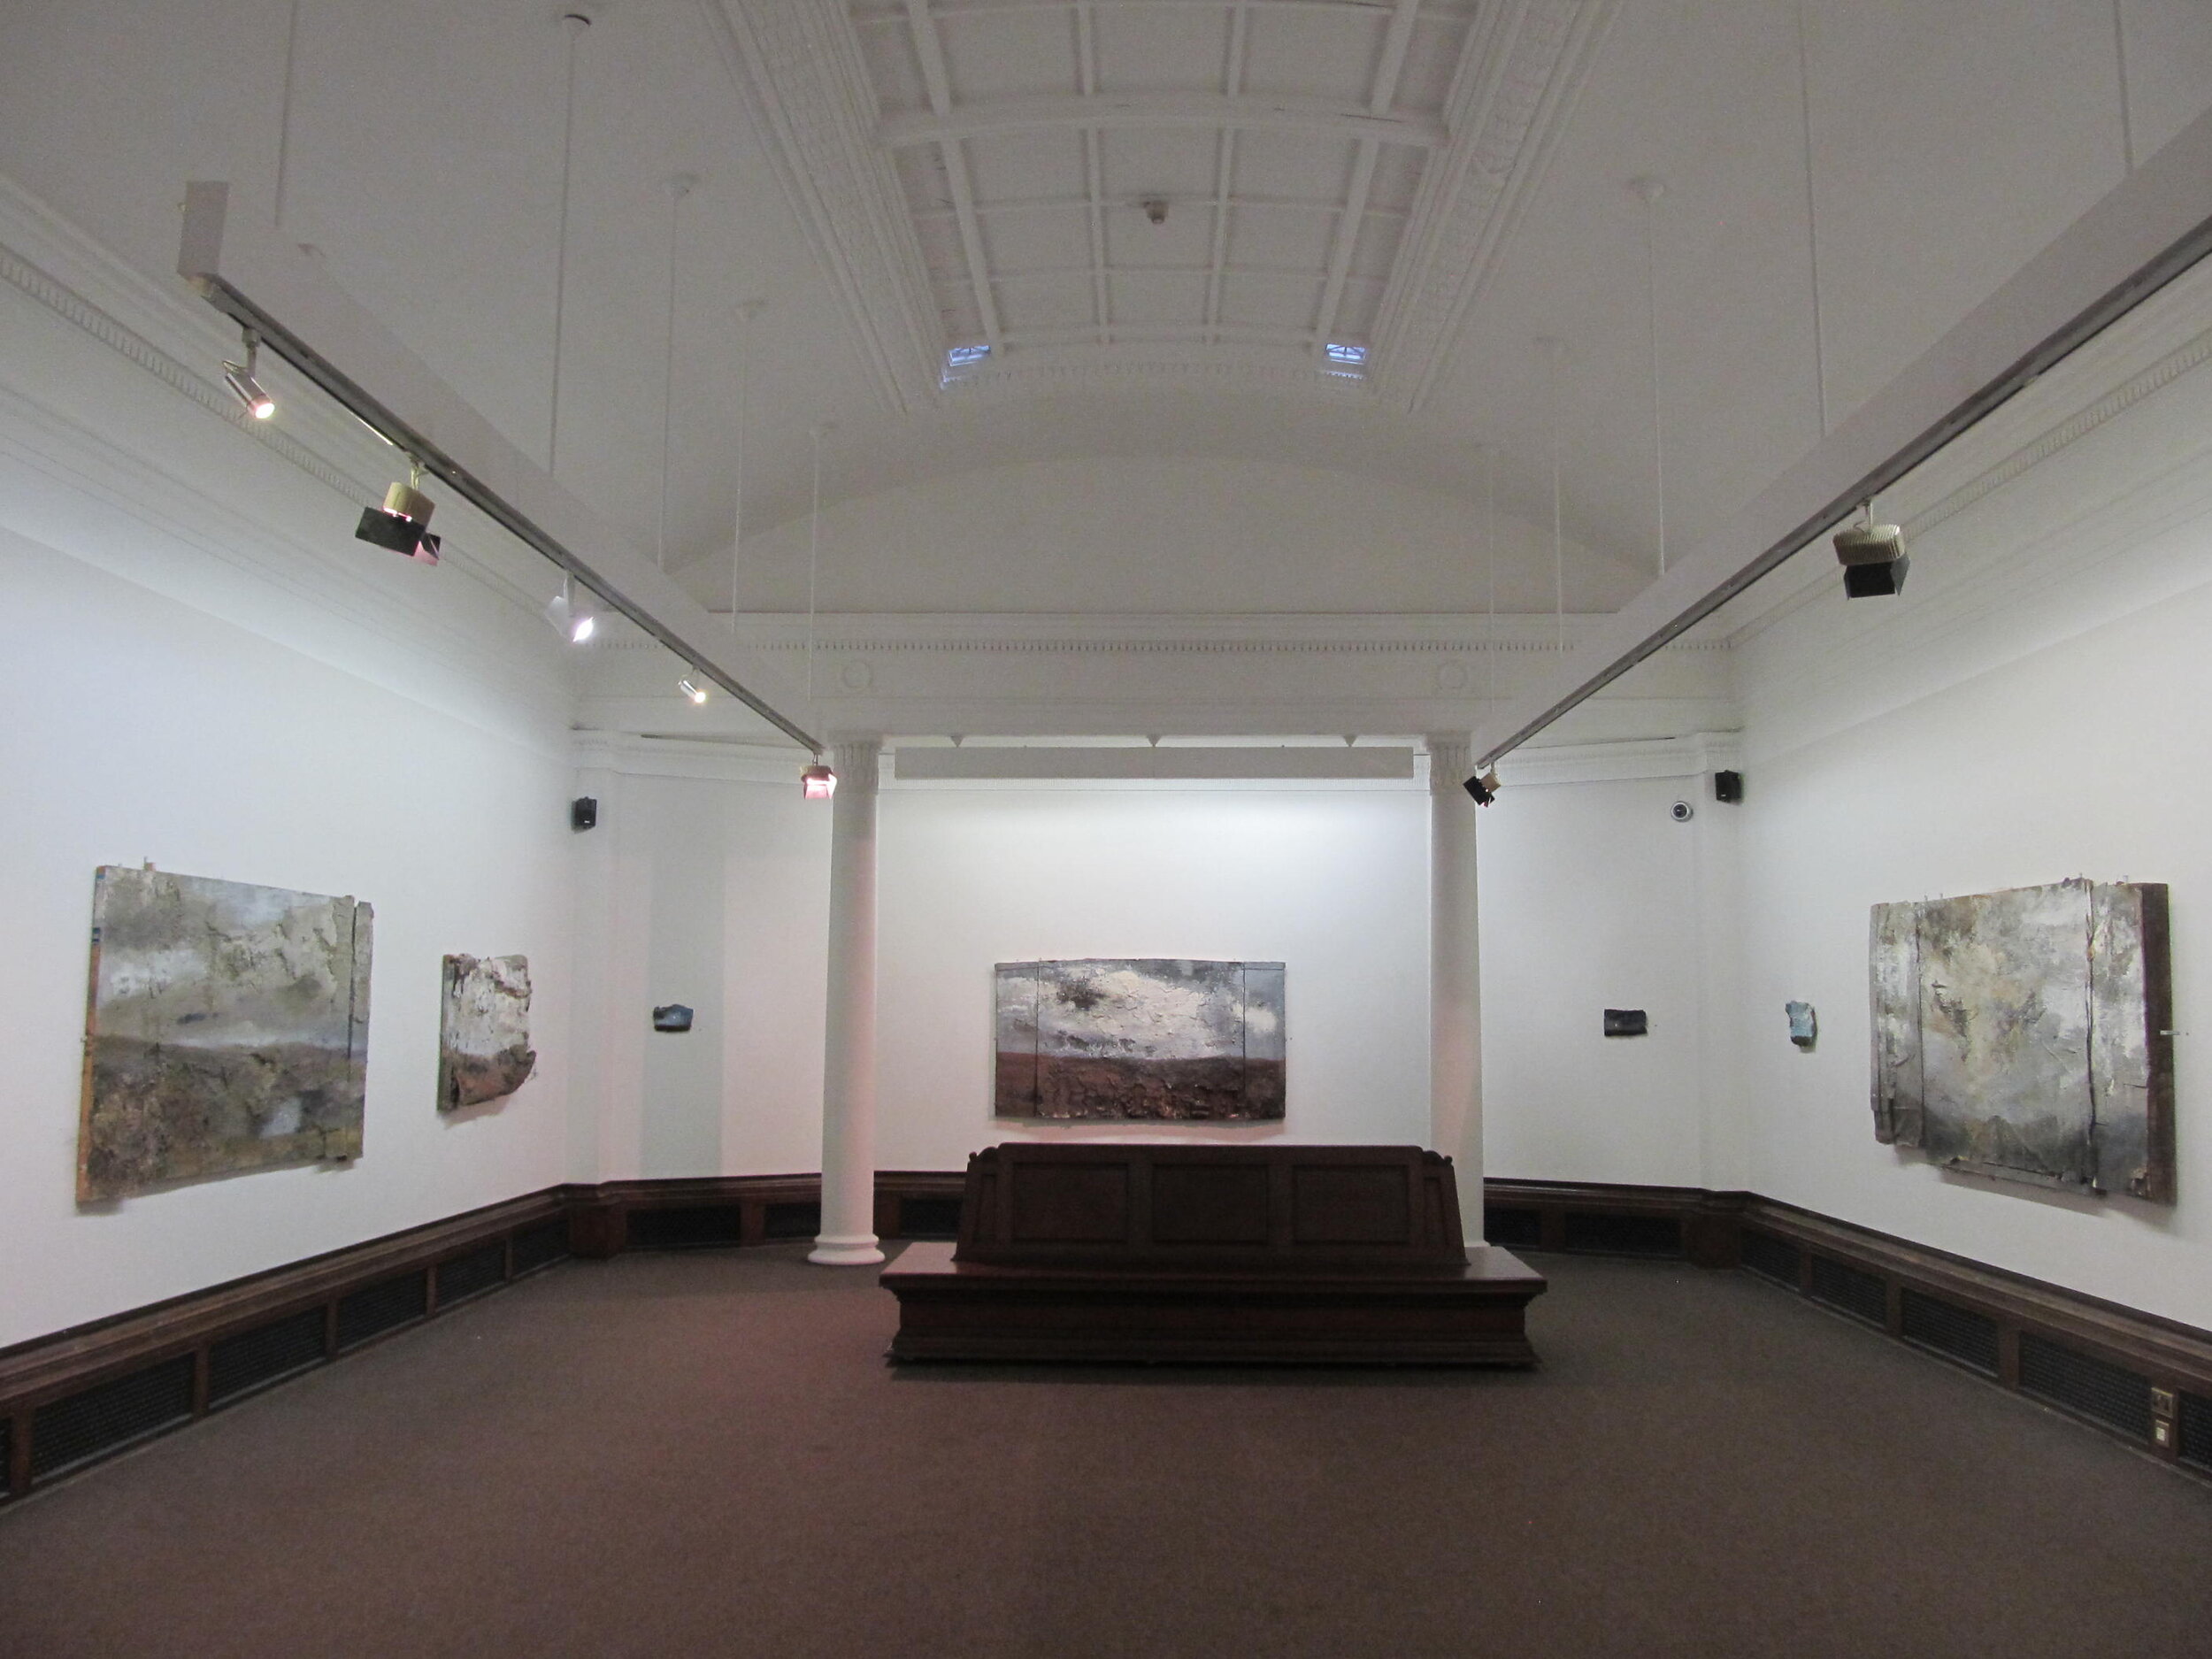 Exhibition Stockport Museum and Art Gallery 2019